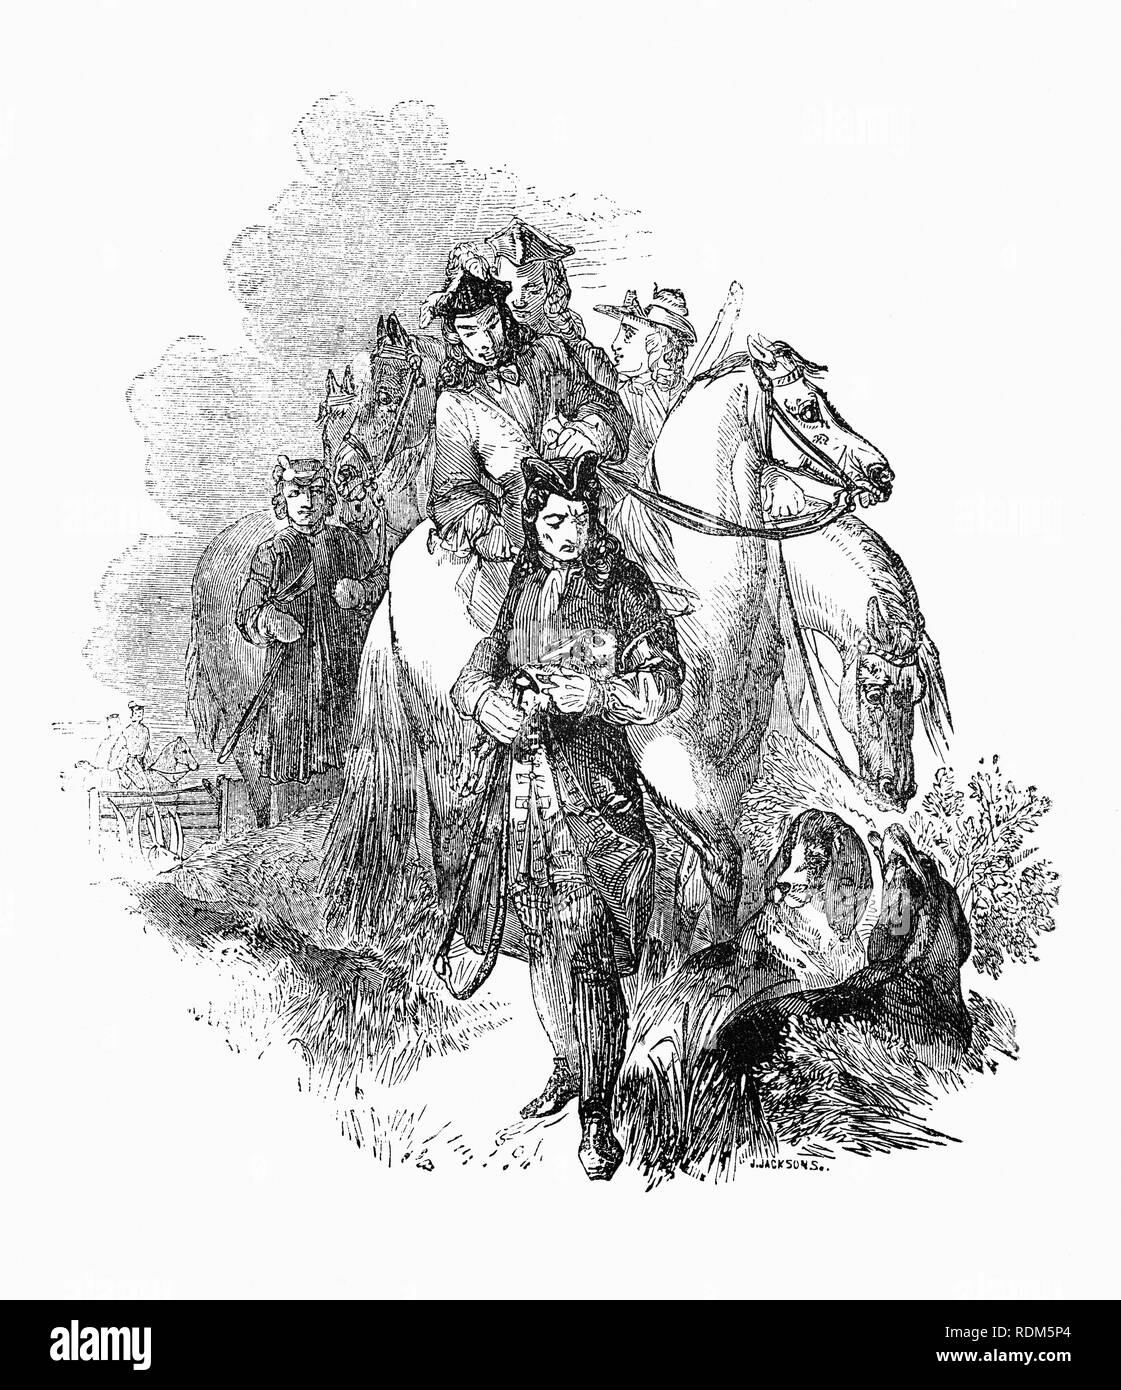 Sir Roger de Coverley, the fictional character, devised by Joseph Addison, who portrayed him as the ostensible author of papers and letters that were published in Addison and Richard Steele’s influential periodical The Spectator.  Sir Roger was a baronet of Worcestershire and was meant to represent a typical landed country gentleman, seen here saving a hare whilst out hunting. He was also a member of the fictitious Spectator Club, and the de Coverley writings included entertaining vignettes of early 18th-century English life that were often considered The Spectator’s best feature. Stock Photo